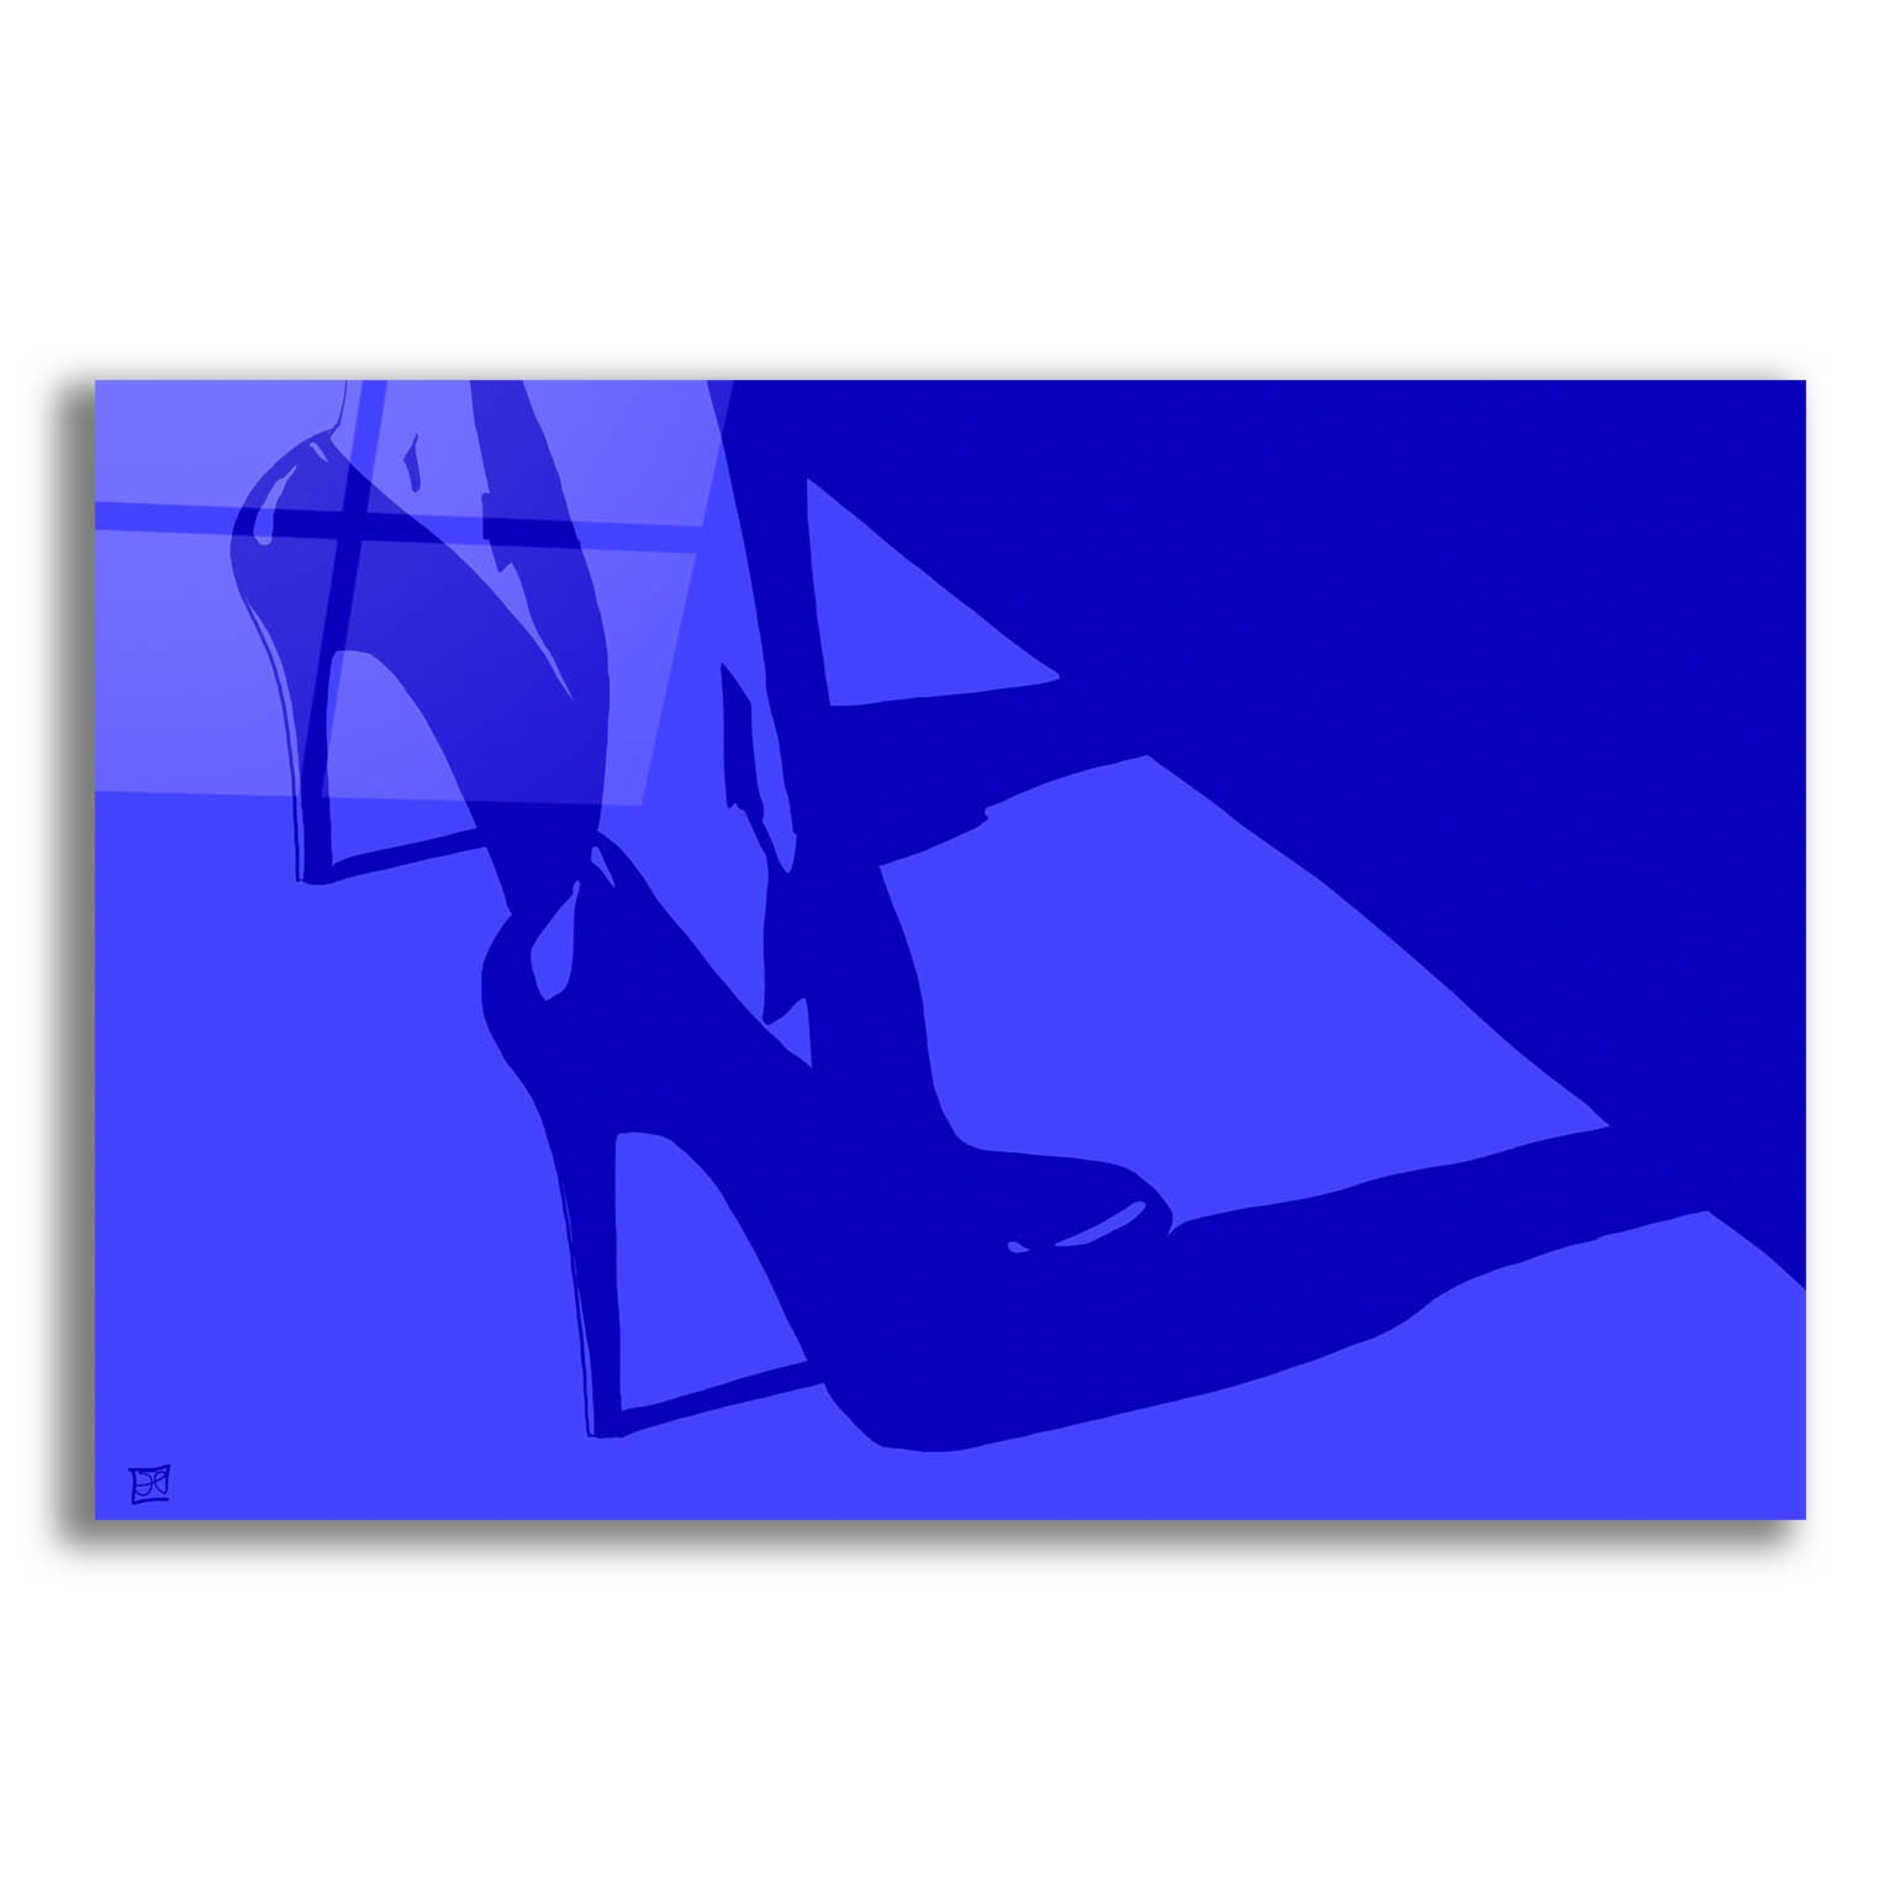 Epic Art 'Heels in blue' by Giuseppe Cristiano, Acrylic Glass Wall Art